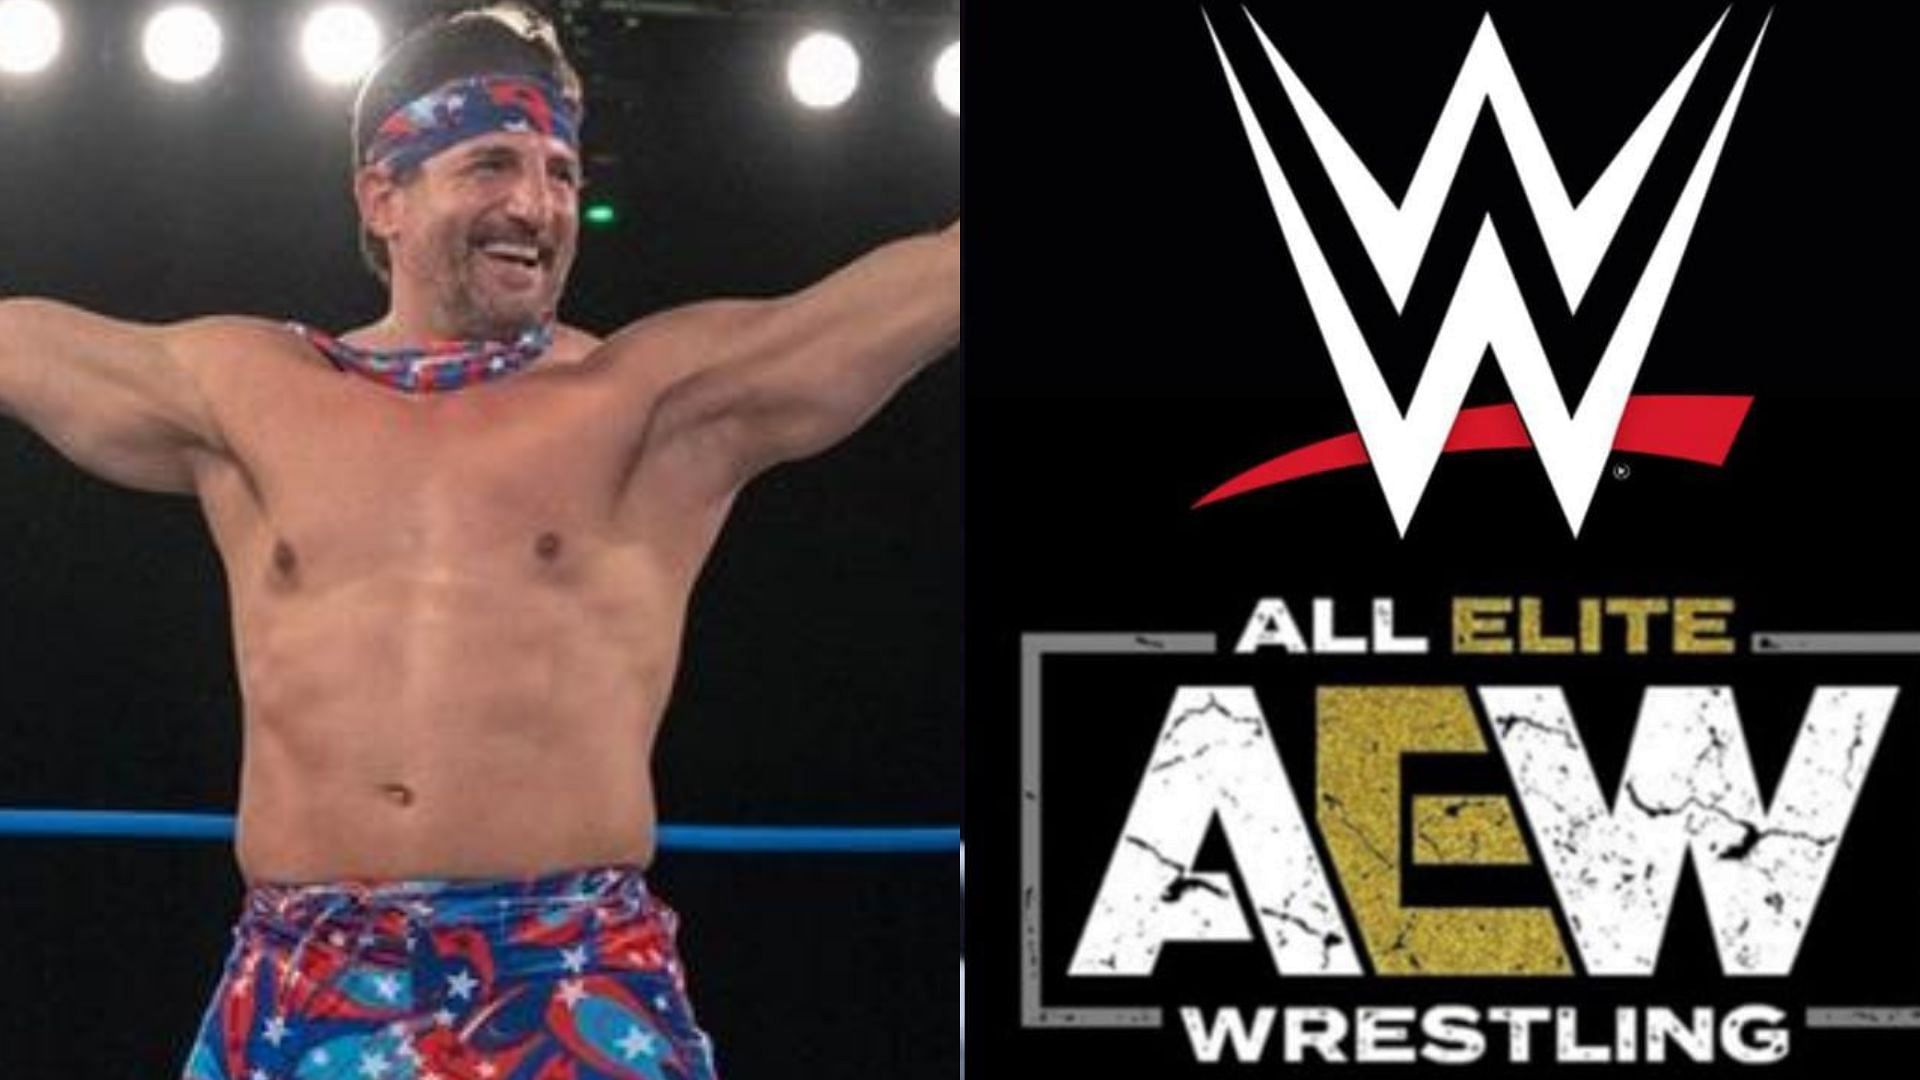 Disco Inferno thinks these AEW stars made a mistake